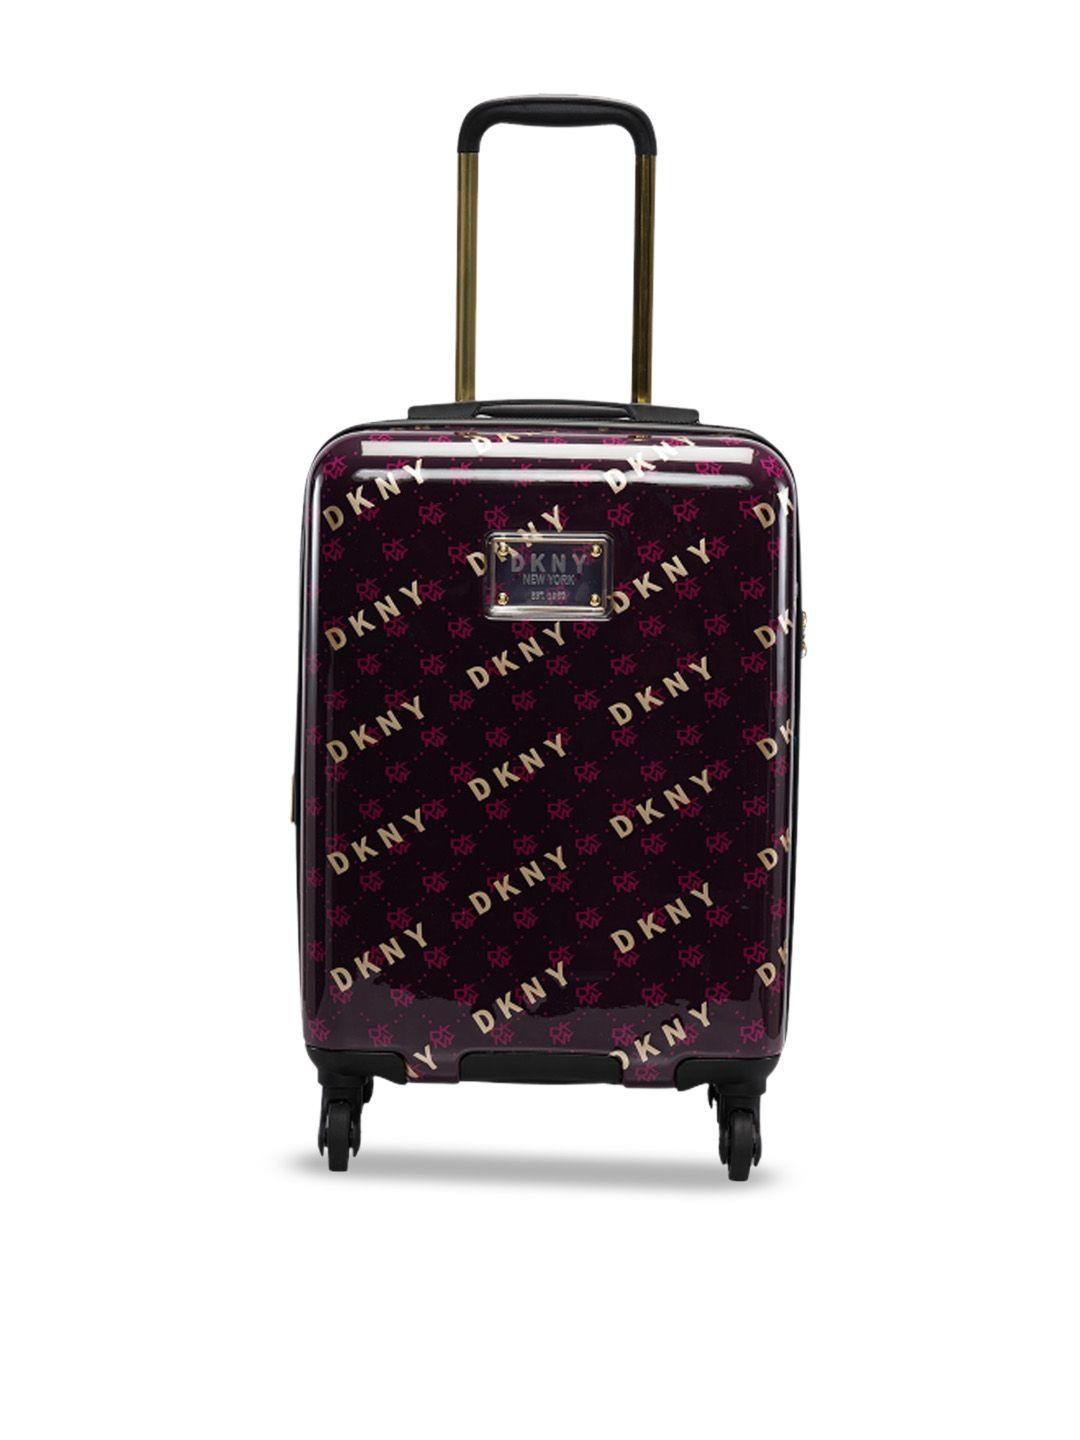 dkny on repeat printed abs material hard-sided cabin trolley bag- 50 cm